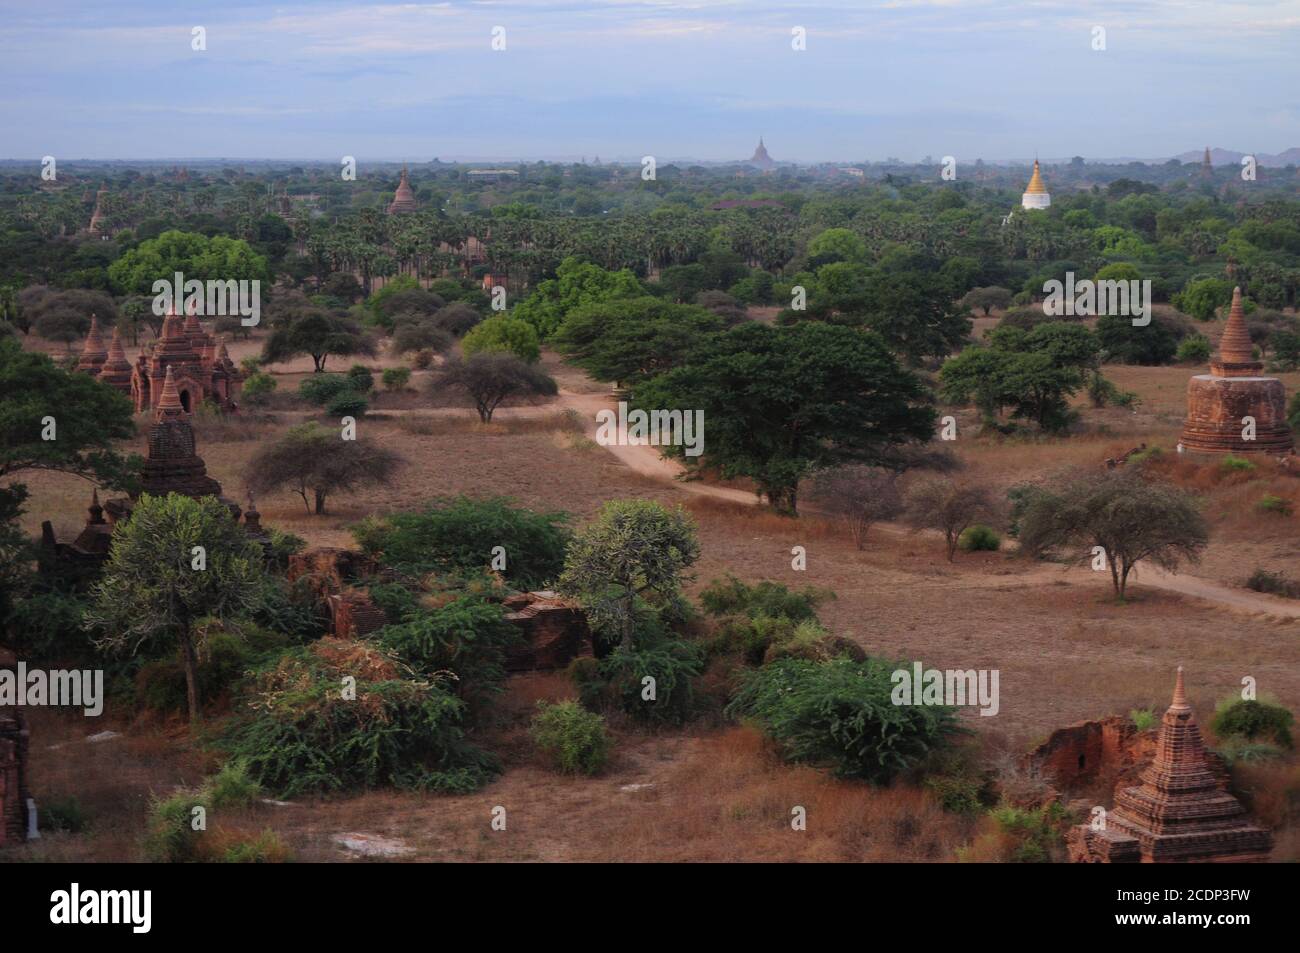 Aerial view of the Old Bagan showing the ancient pagodas and temples amidst the lust greeneries and dirt roads Stock Photo